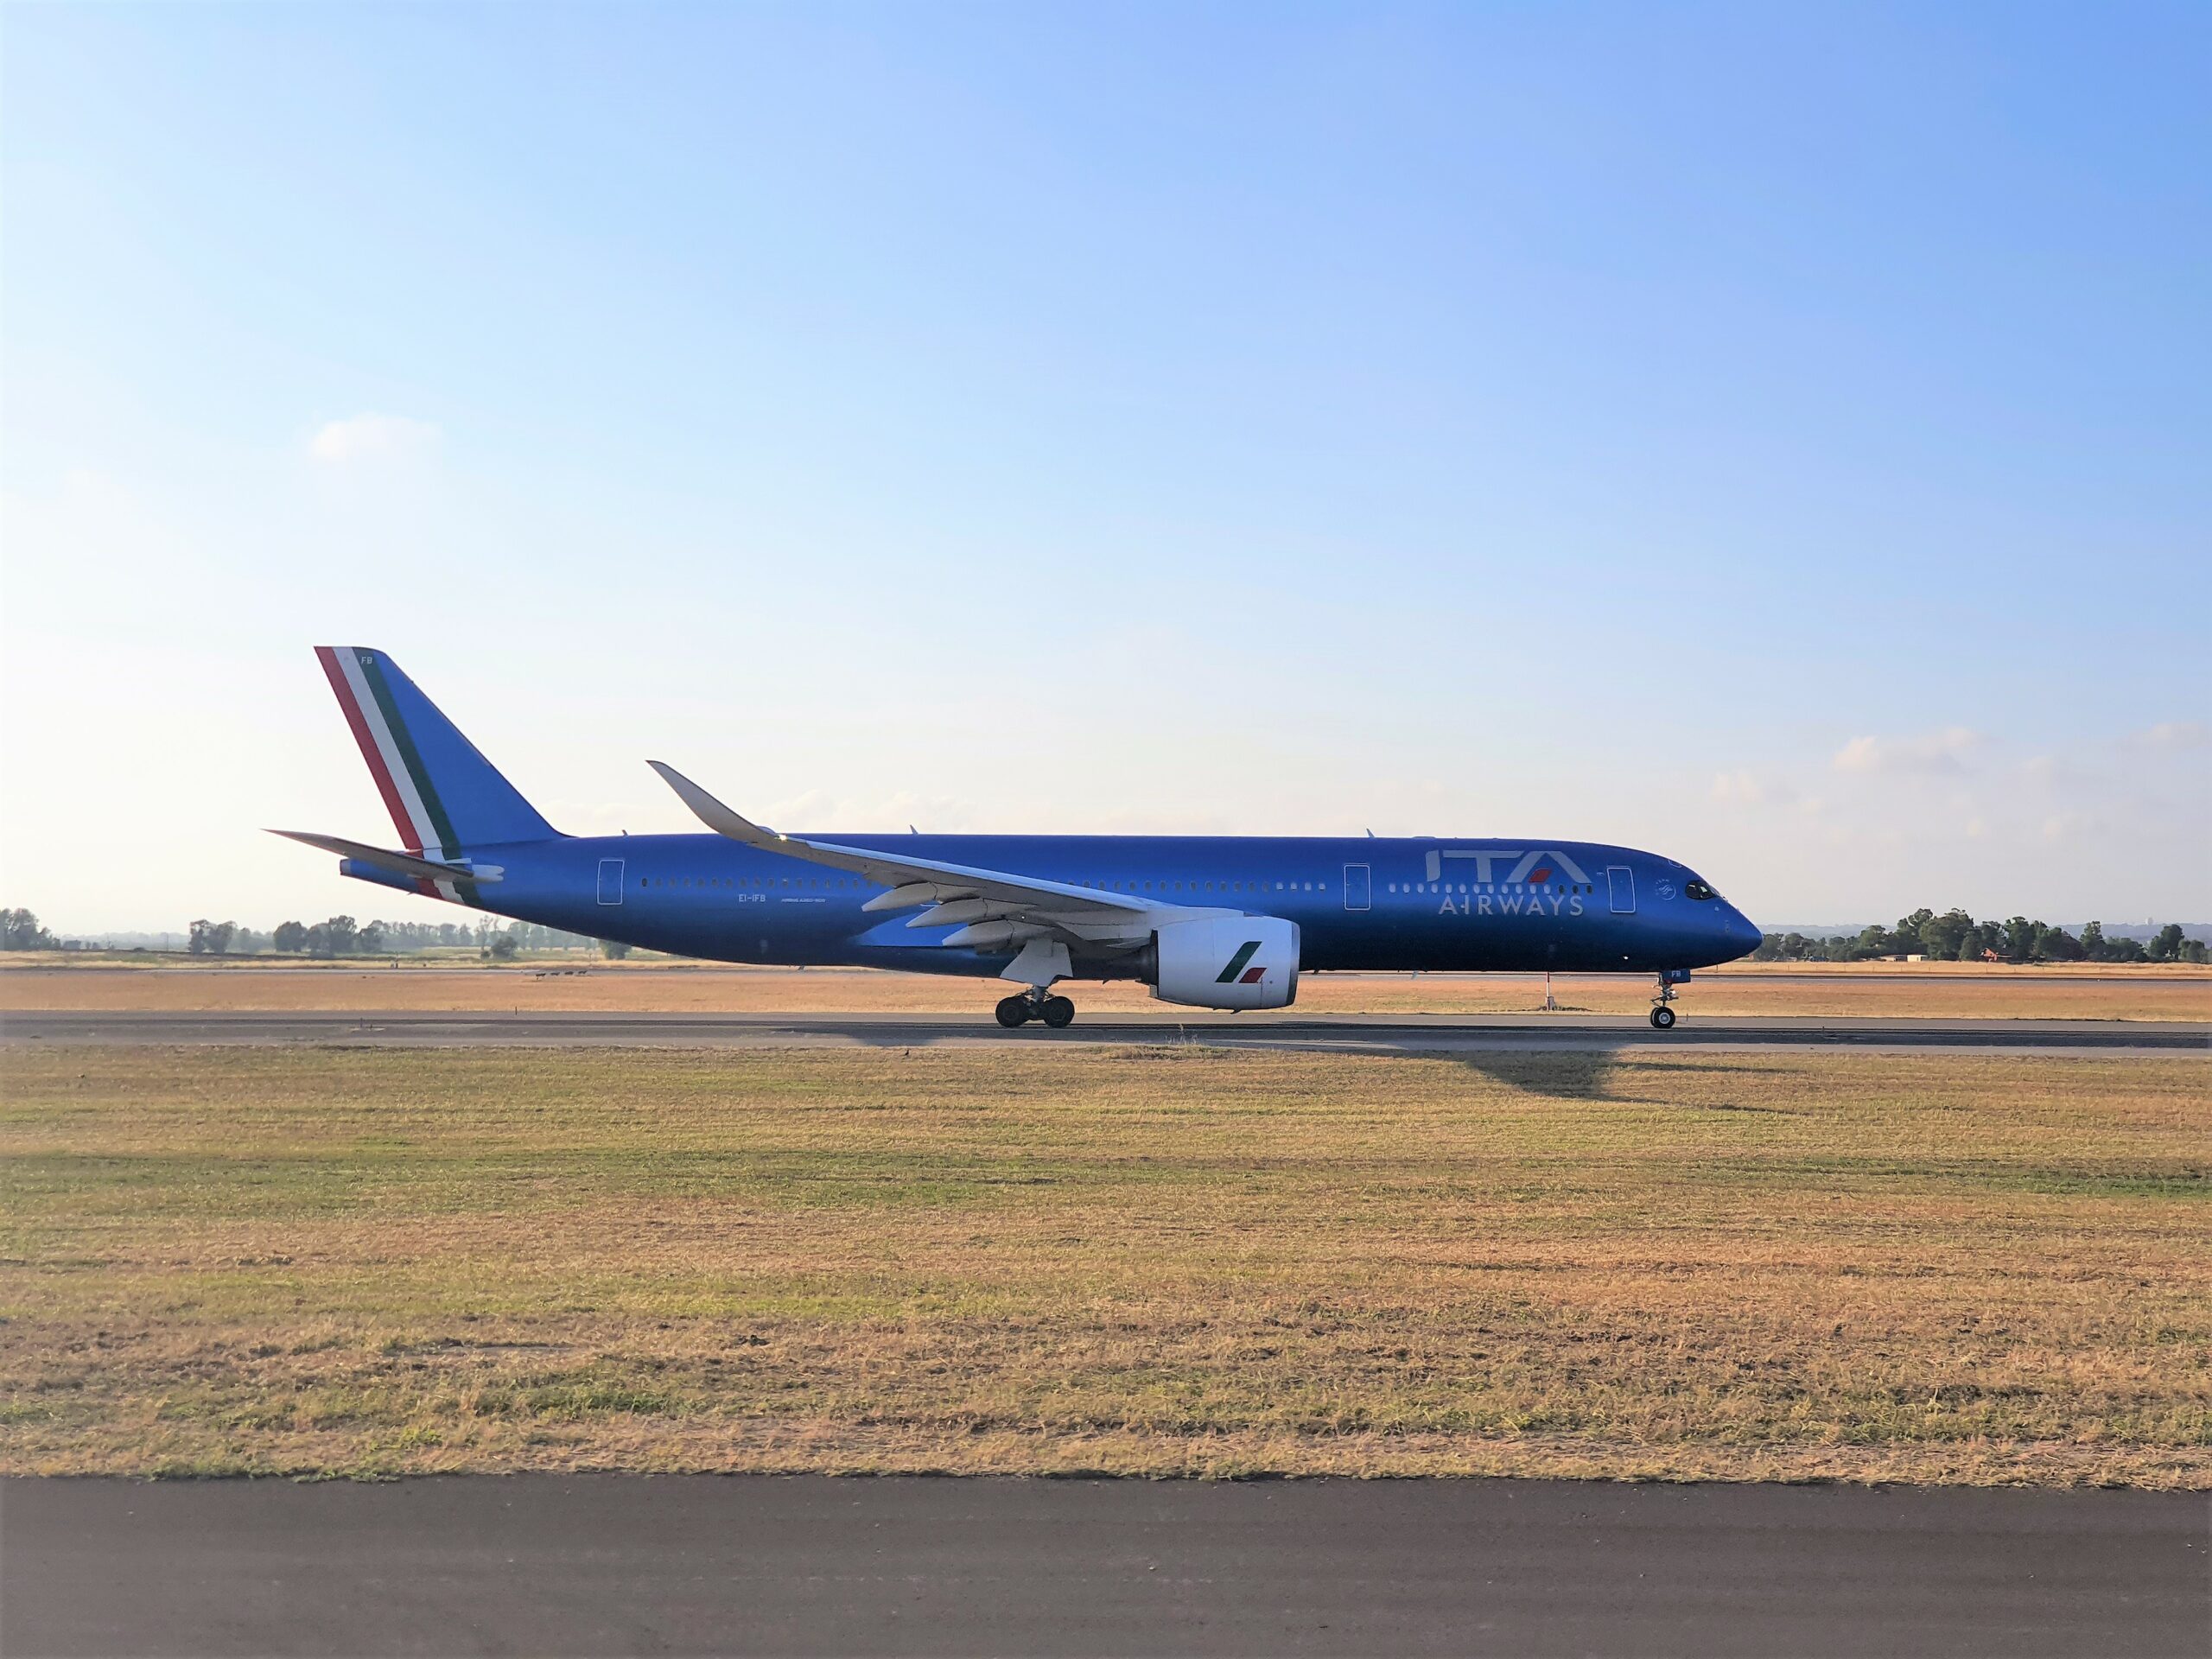 ITA Airways is renewed all in the name of Made in Italy, including